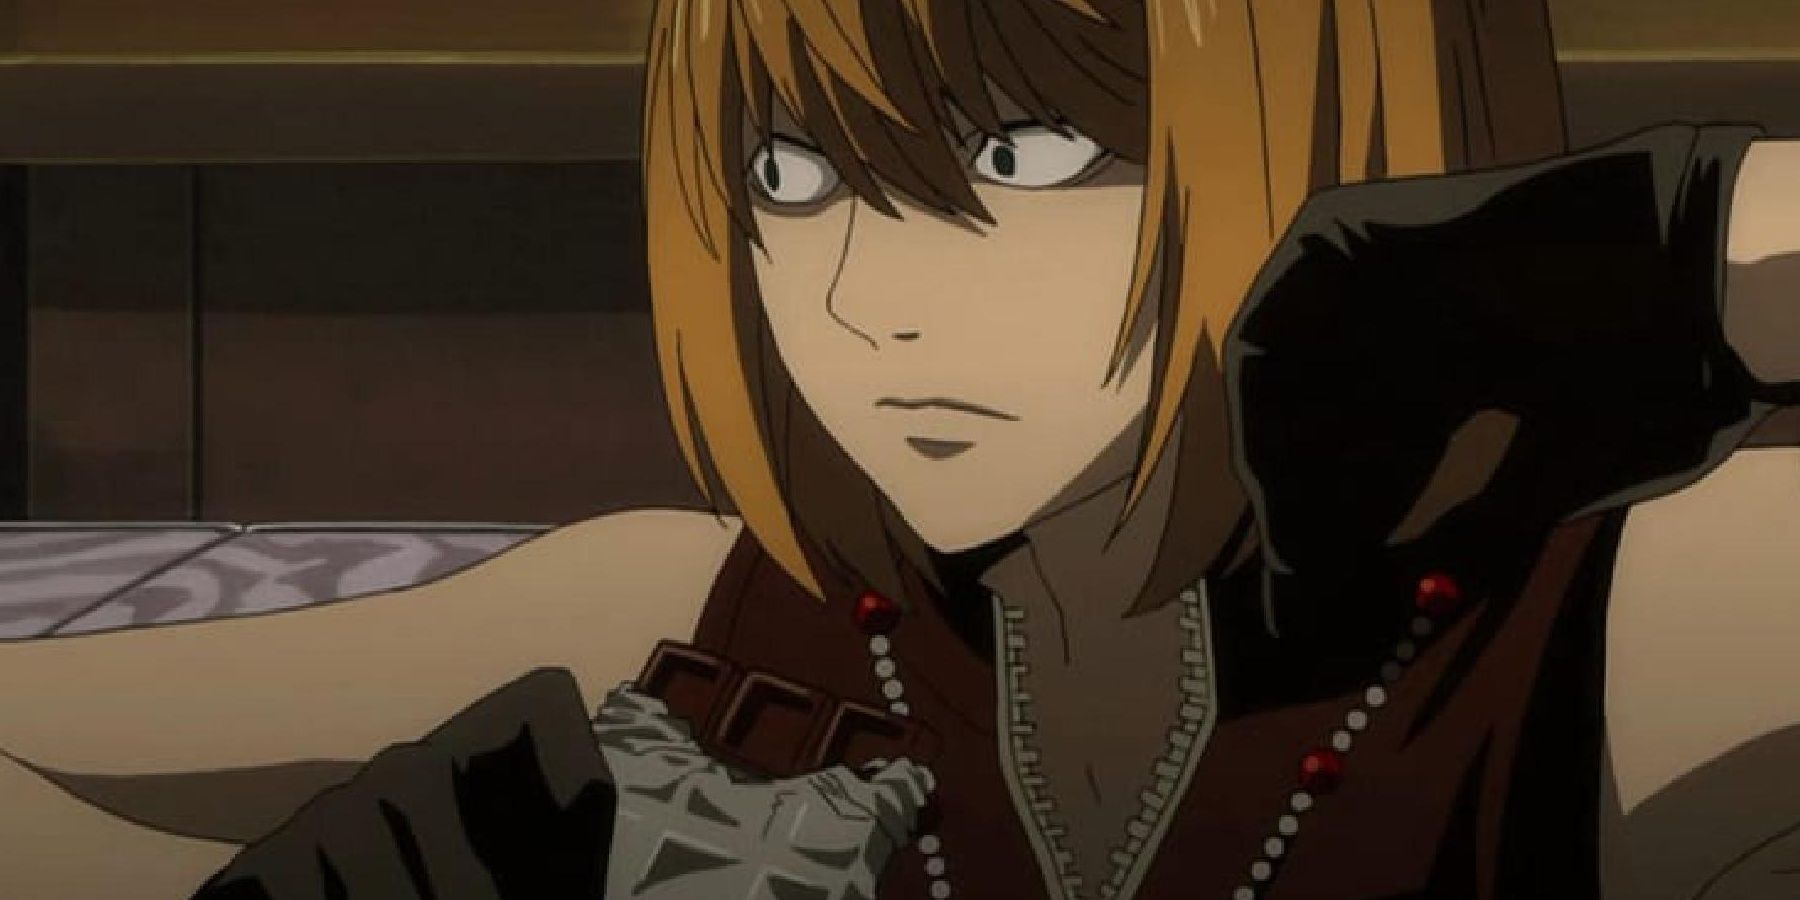 mello with chocolate